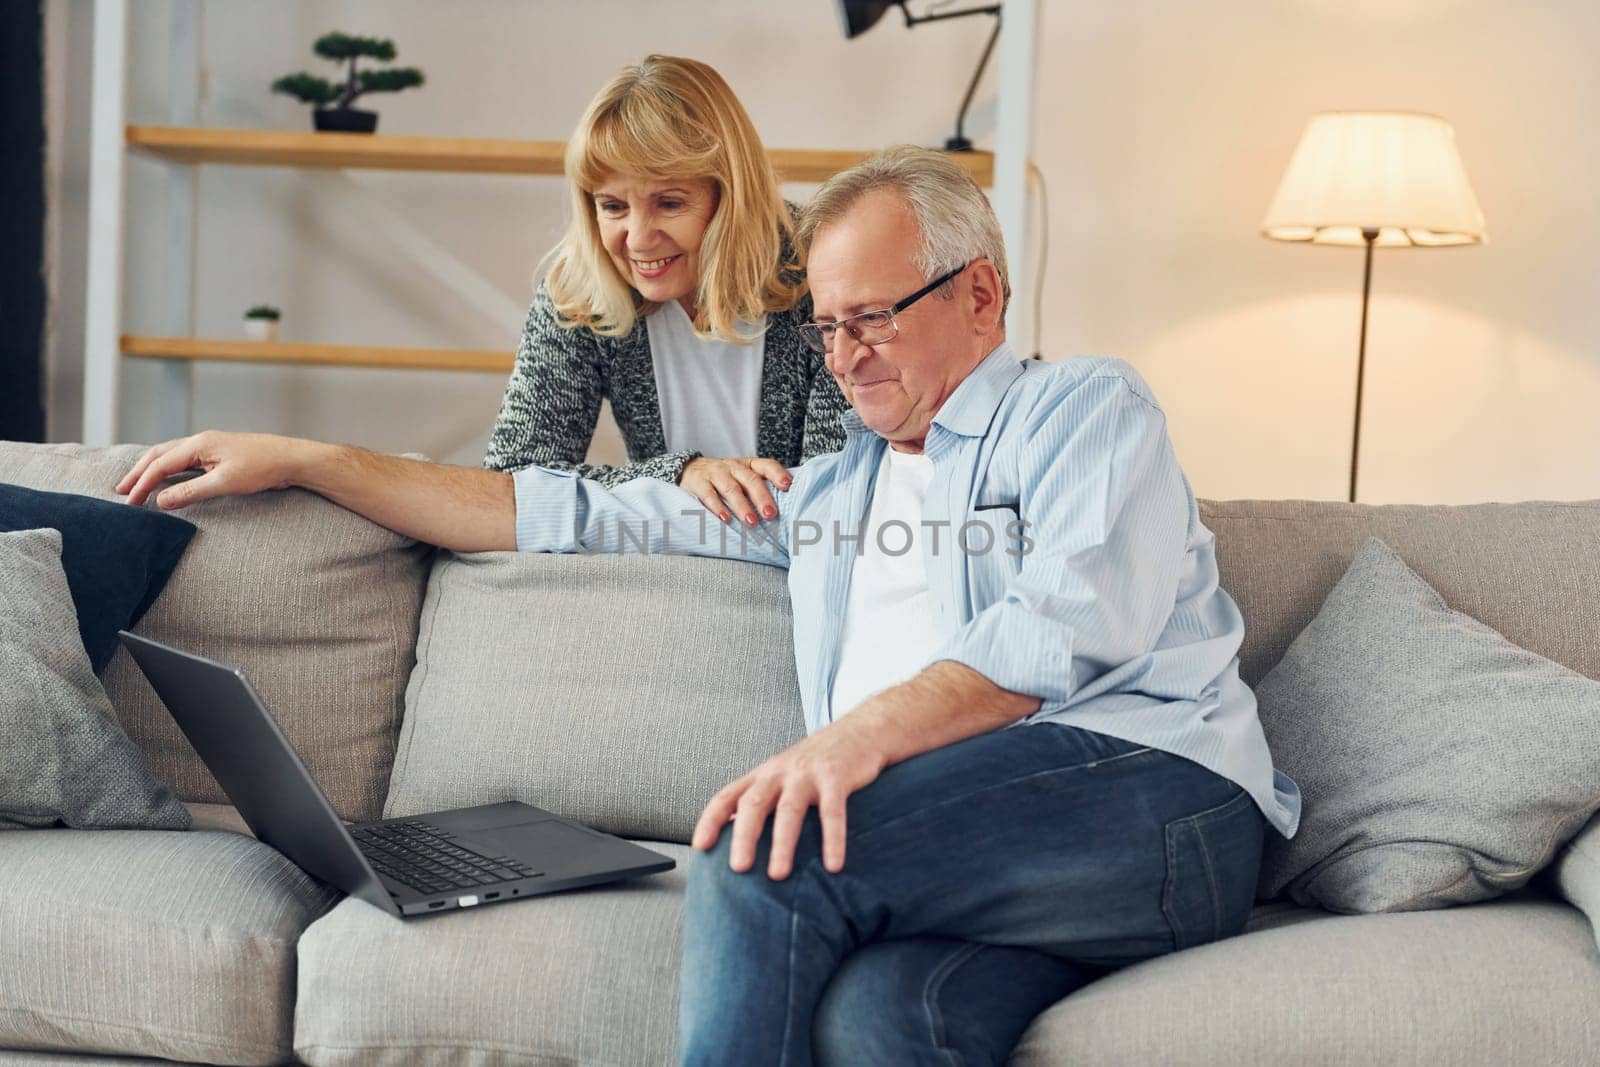 With modern laptop. Senior man and woman is together at home.